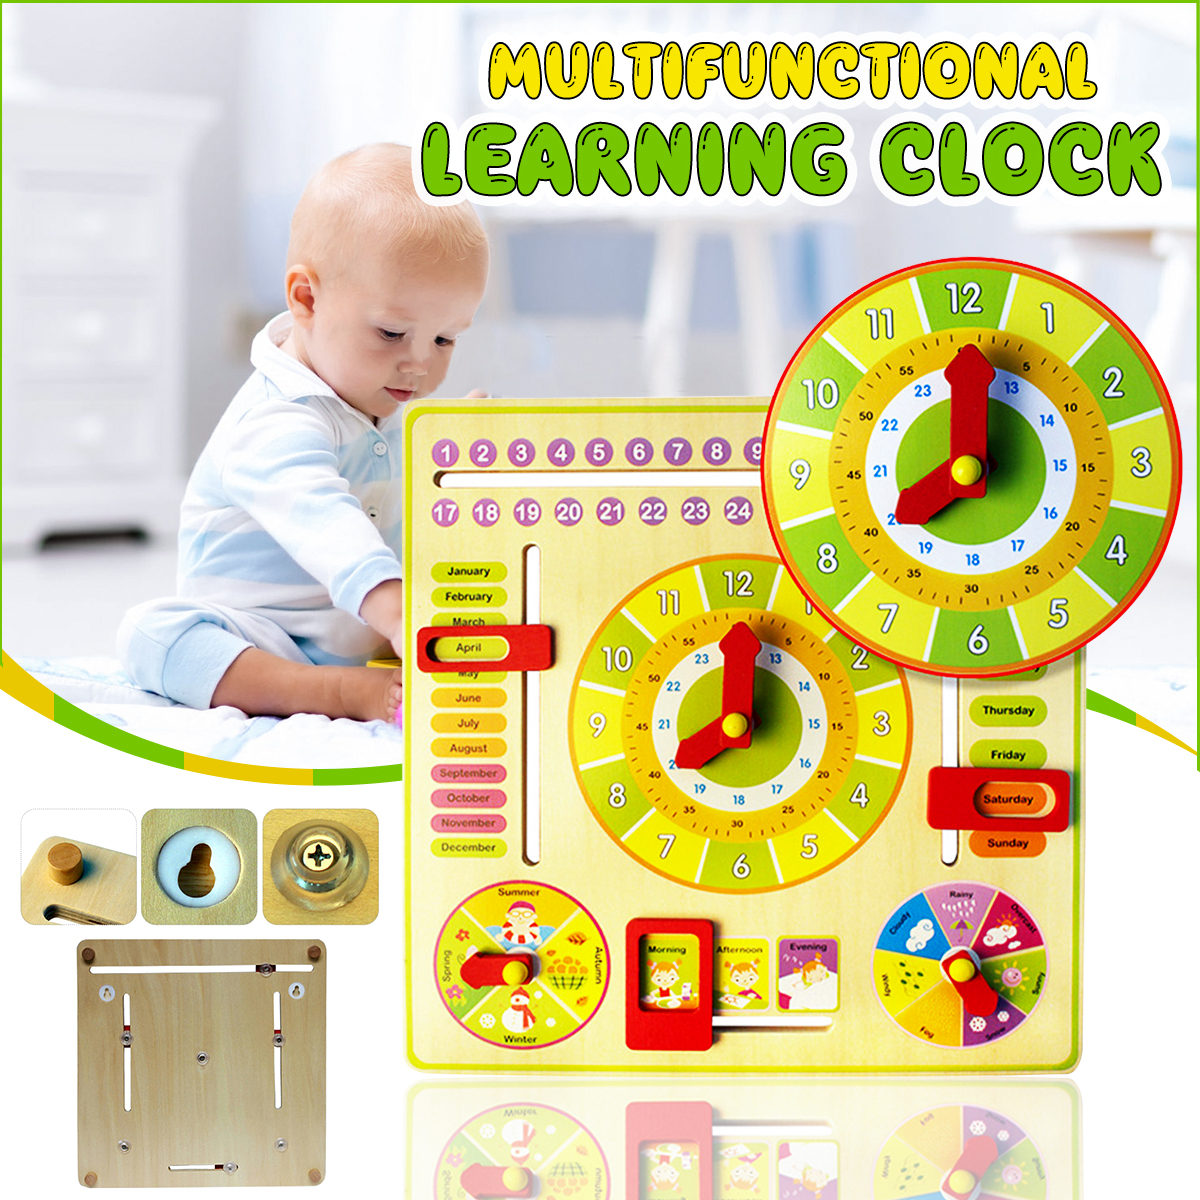 Wooden-Multifunction-Learning-Clock-Toy-Alarm-Calendar-Cognition-Educational-Toys-1550385-2